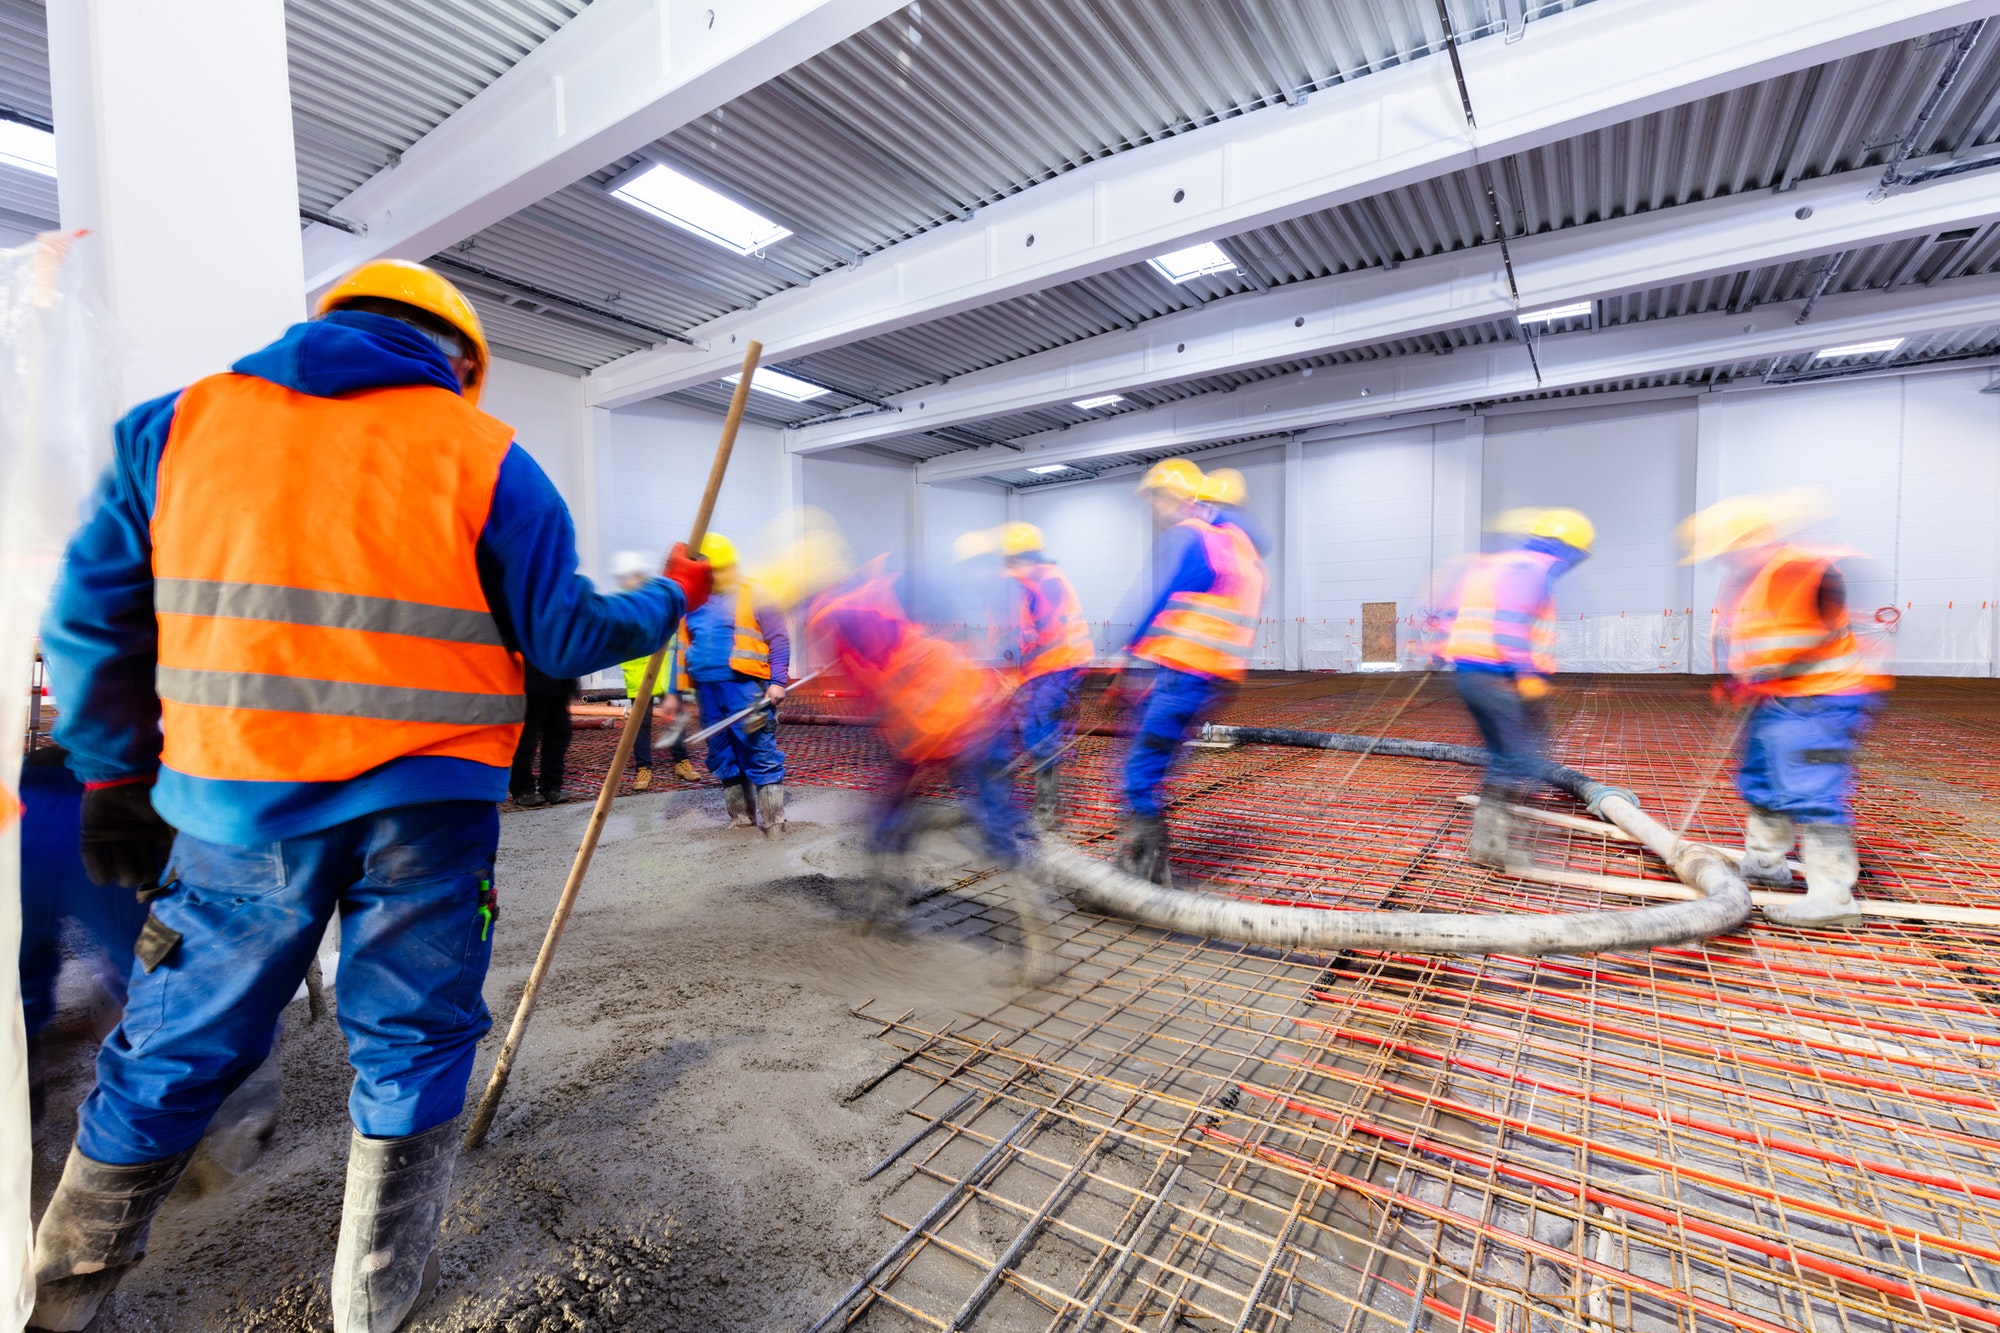 Workers do concrete screed on floor with heating in a new warehouse building